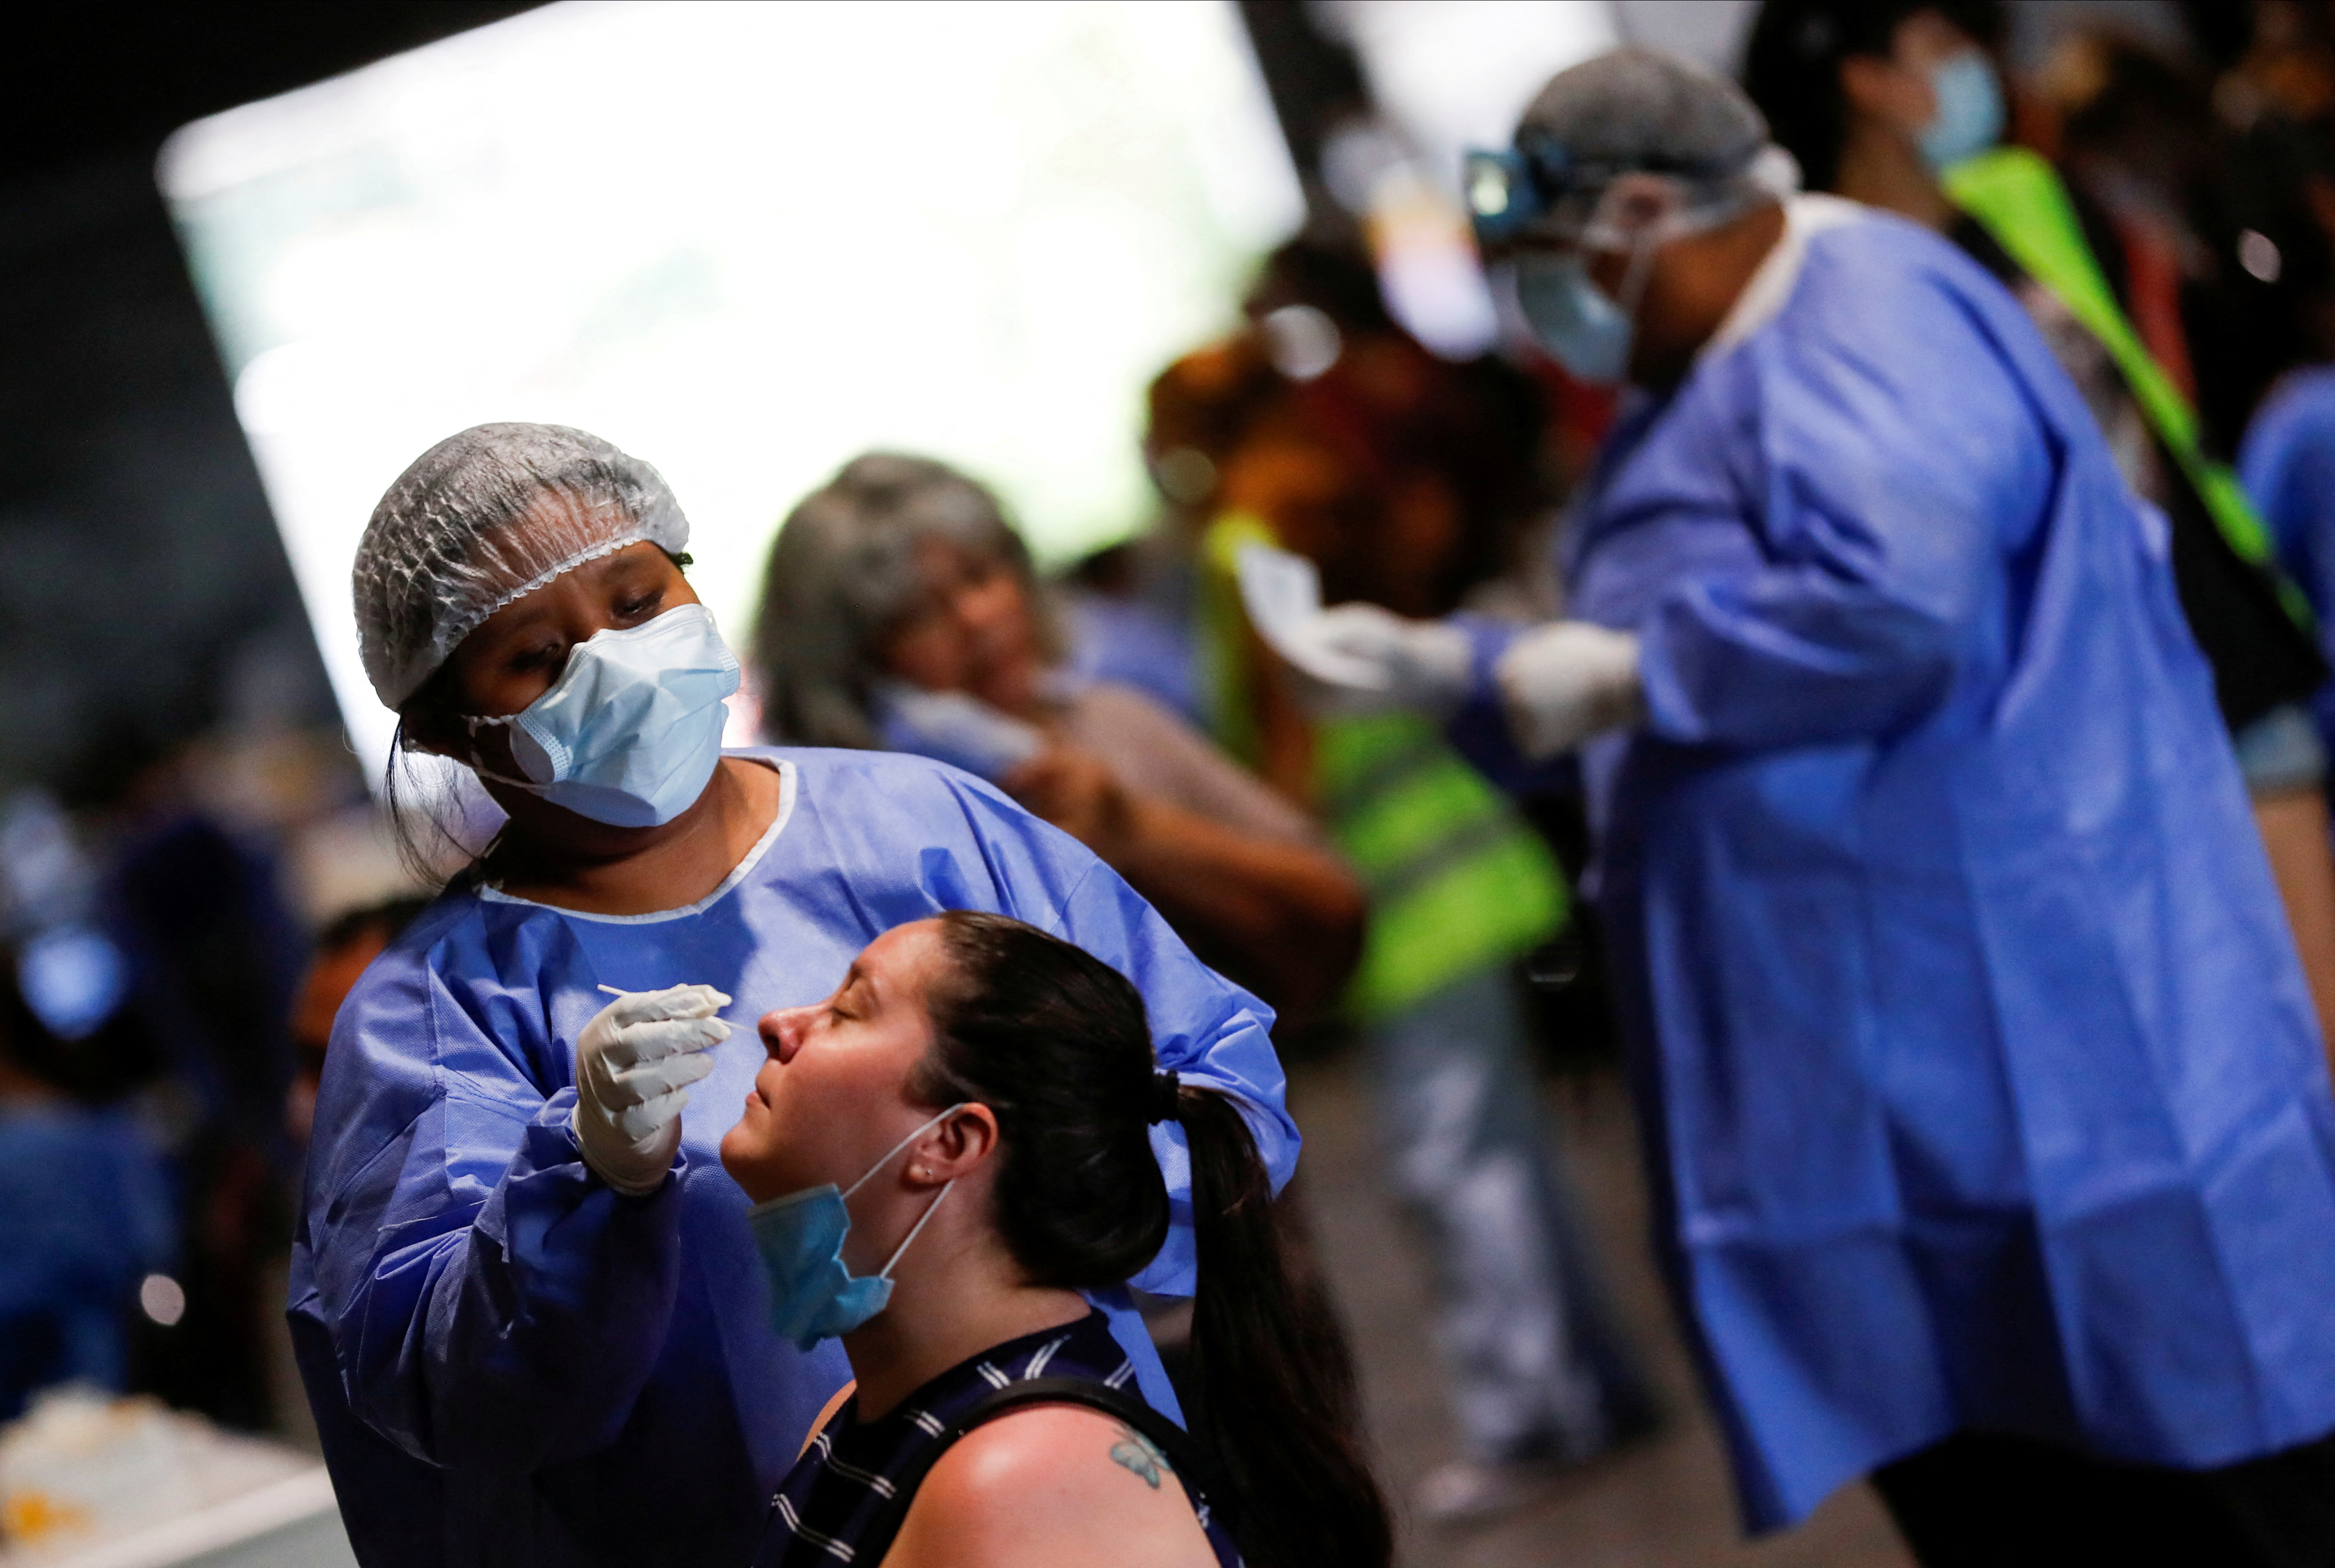 FILE PHOTO: A healthcare worker takes a swab sample from a woman to be tested for the coronavirus disease (COVID-19), at La Rural, in Buenos Aires, Argentina December 23, 2021. Picture taken December 23, 2021. REUTERS/Agustin Marcarian/File Photo